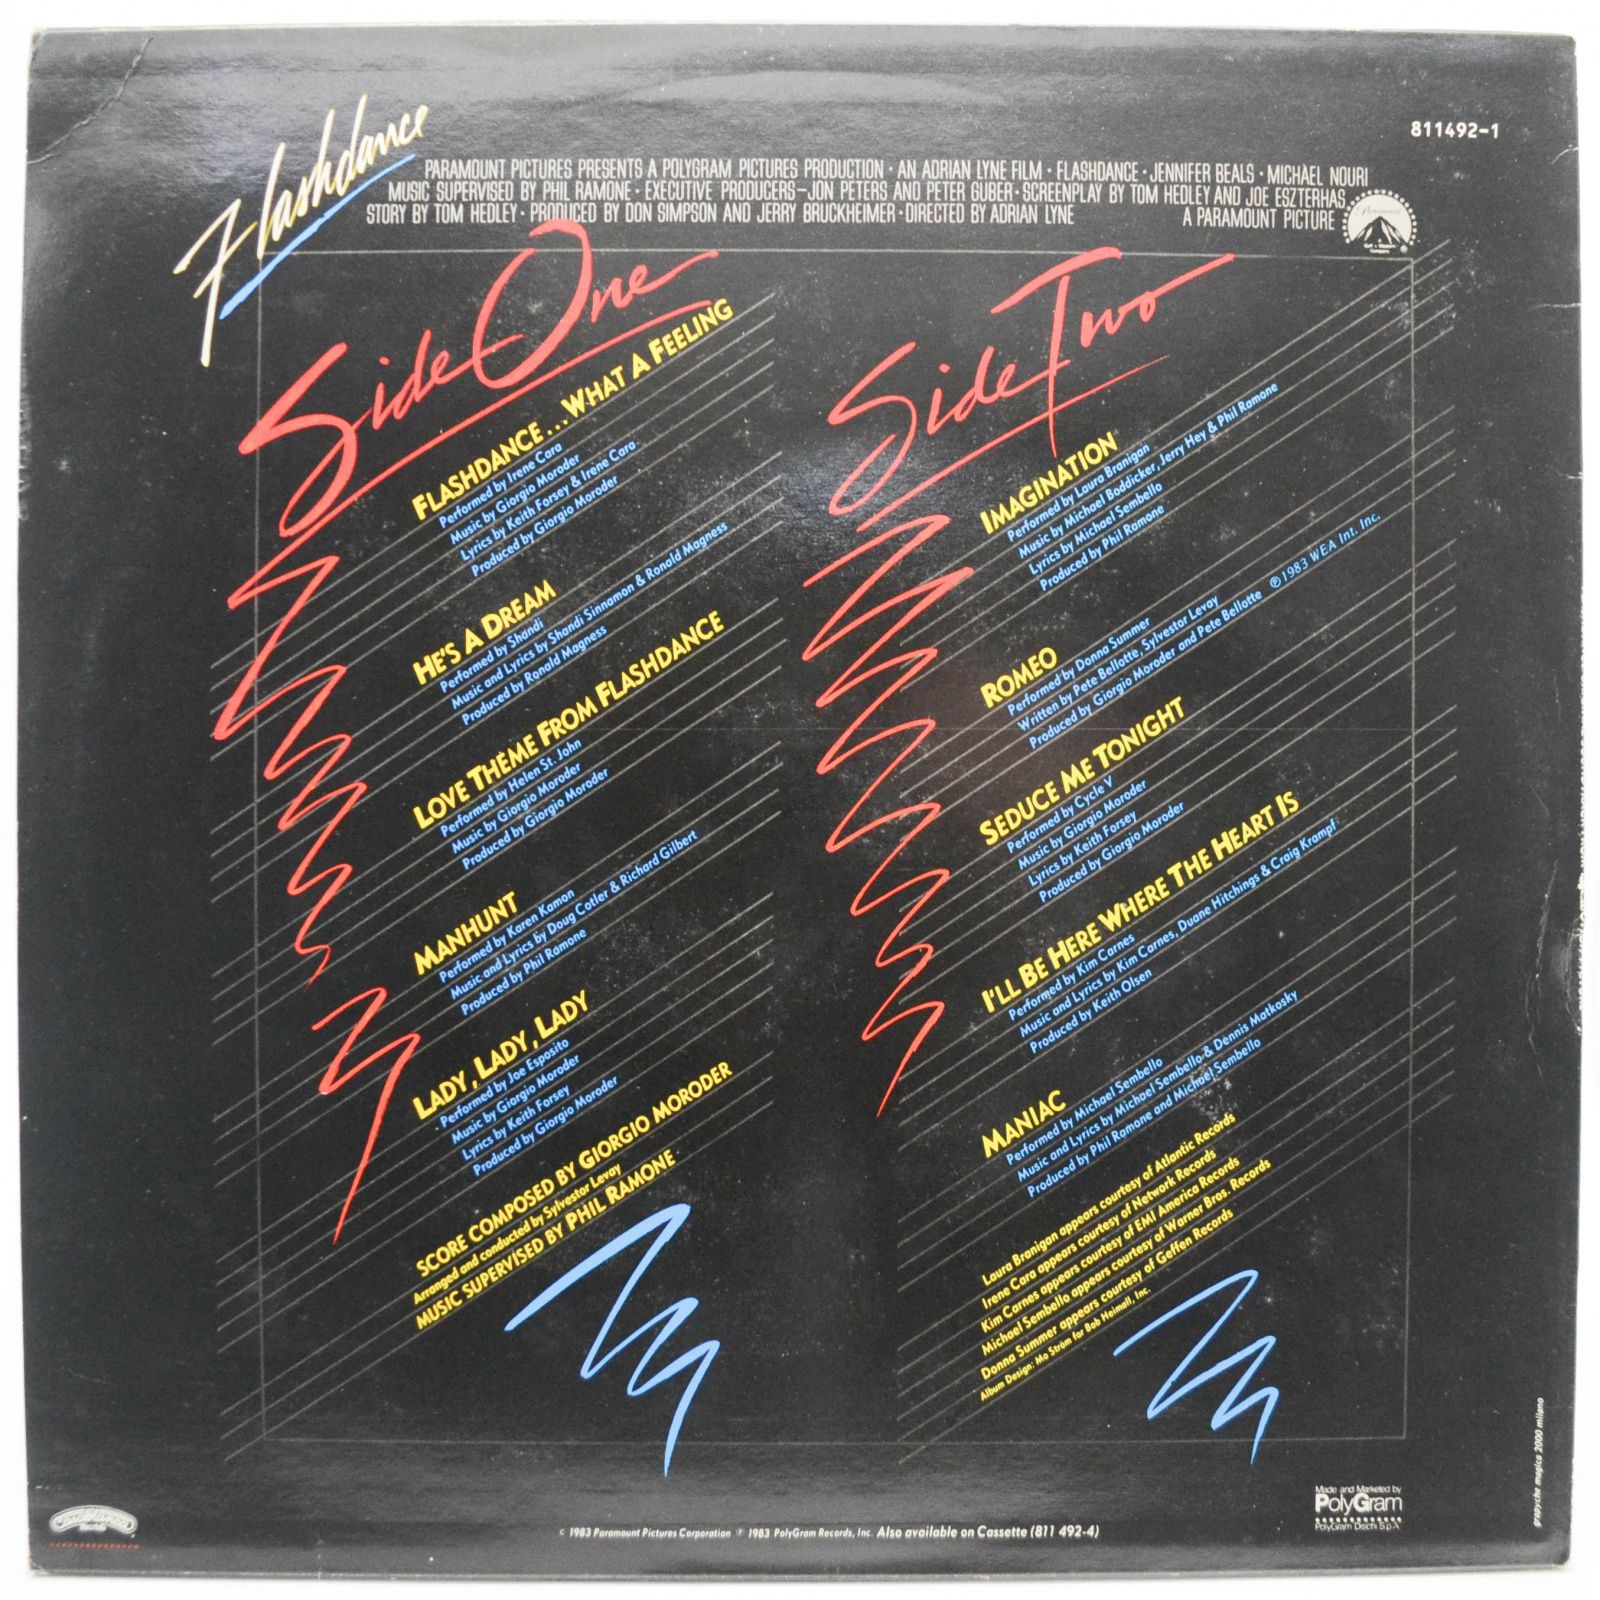 Various — Flashdance (Original Soundtrack From The Motion Picture) (Italy), 1983